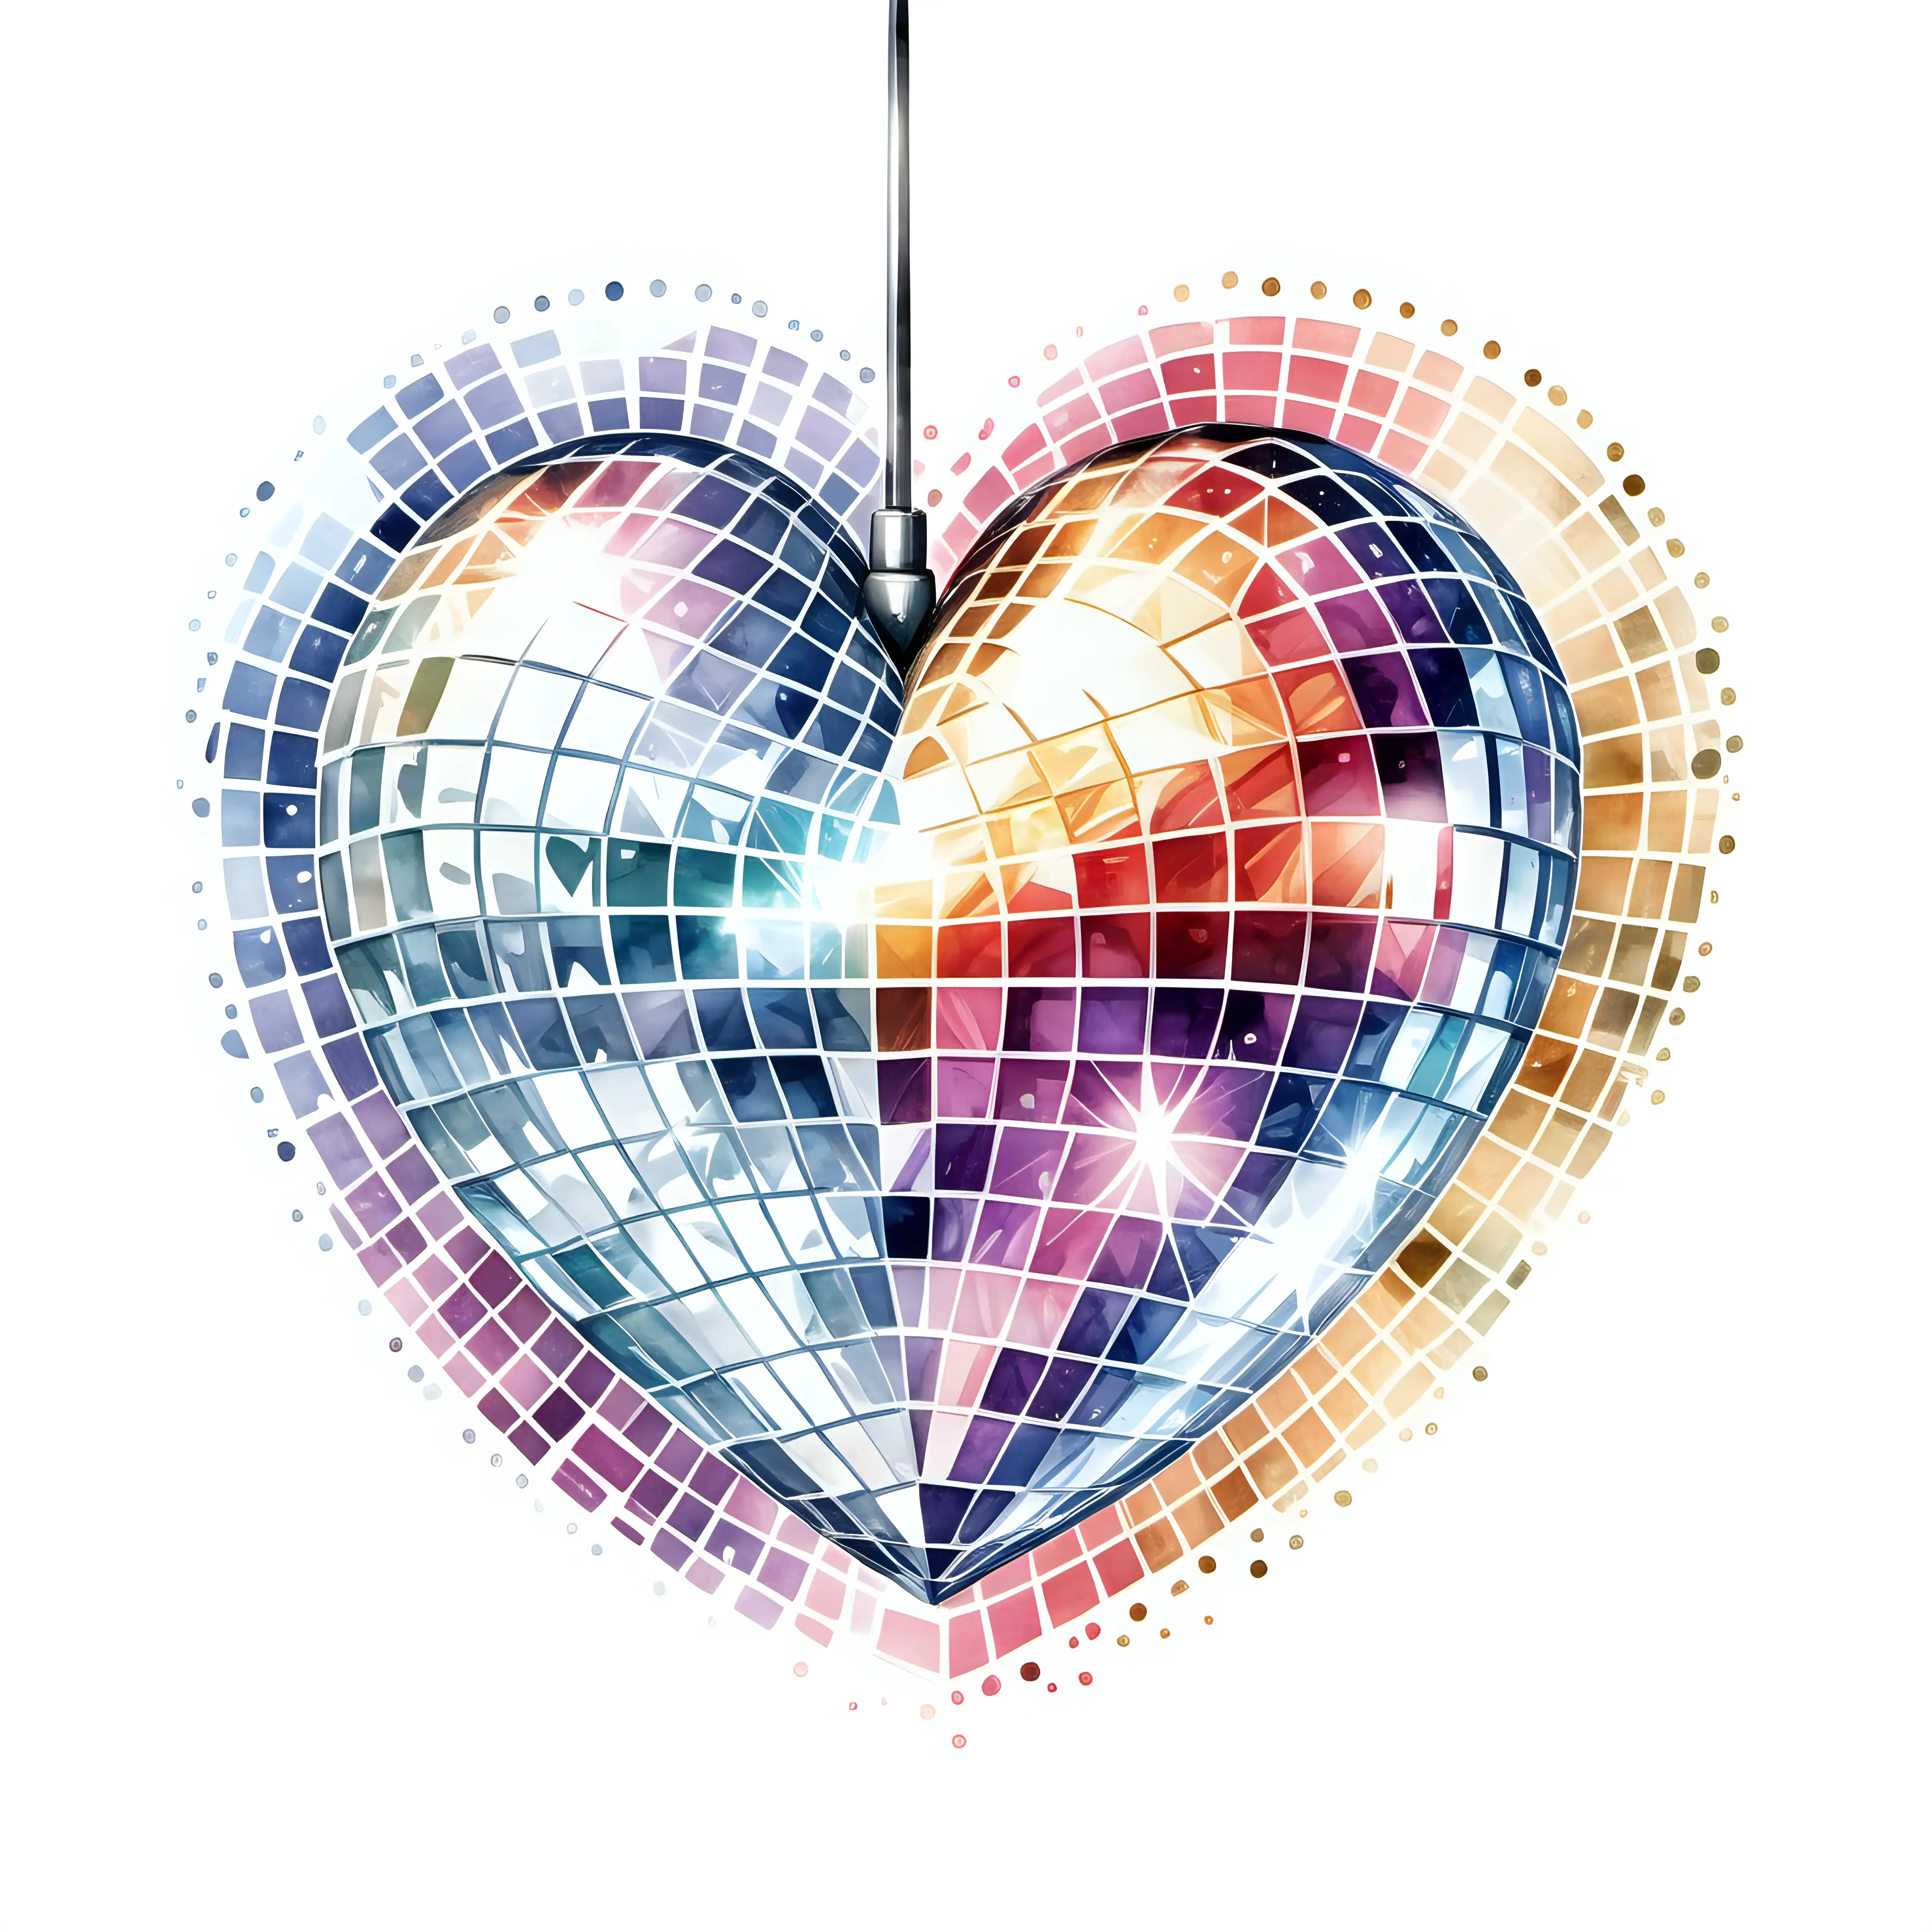 Vibrant Watercolor Illustration HeartShaped Disco Ball on White Background